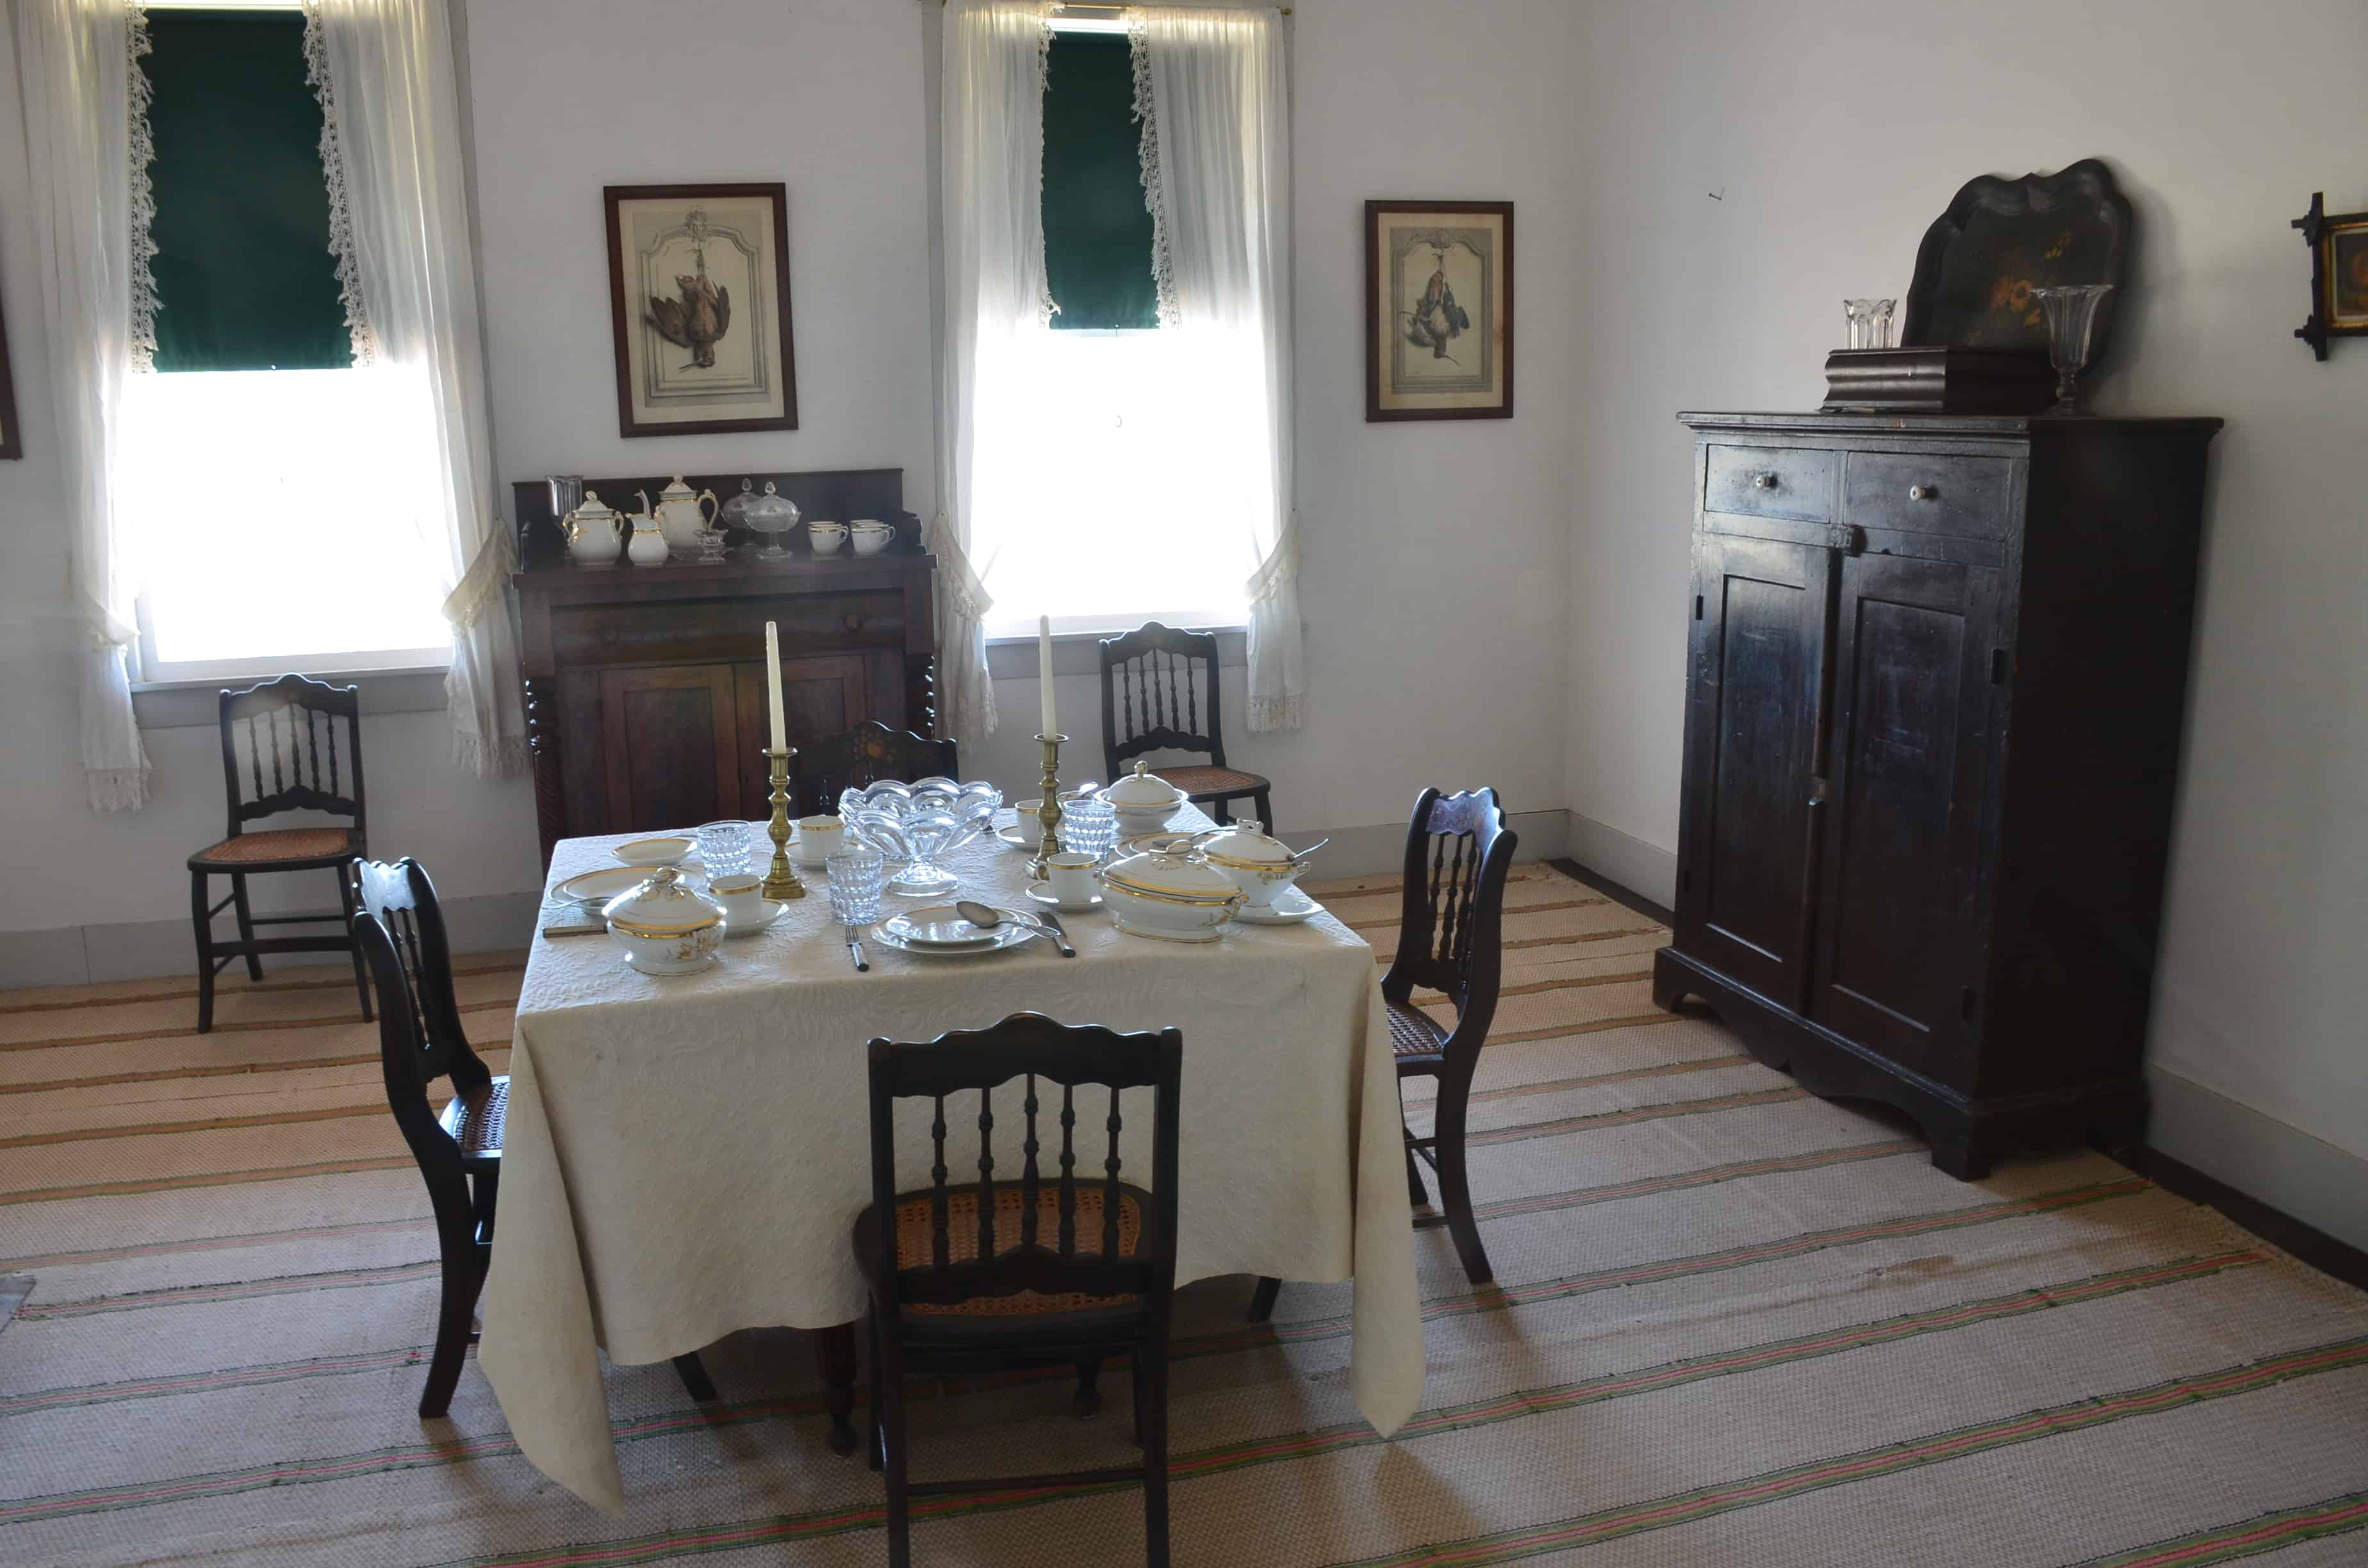 Dining room in the captain's quarters